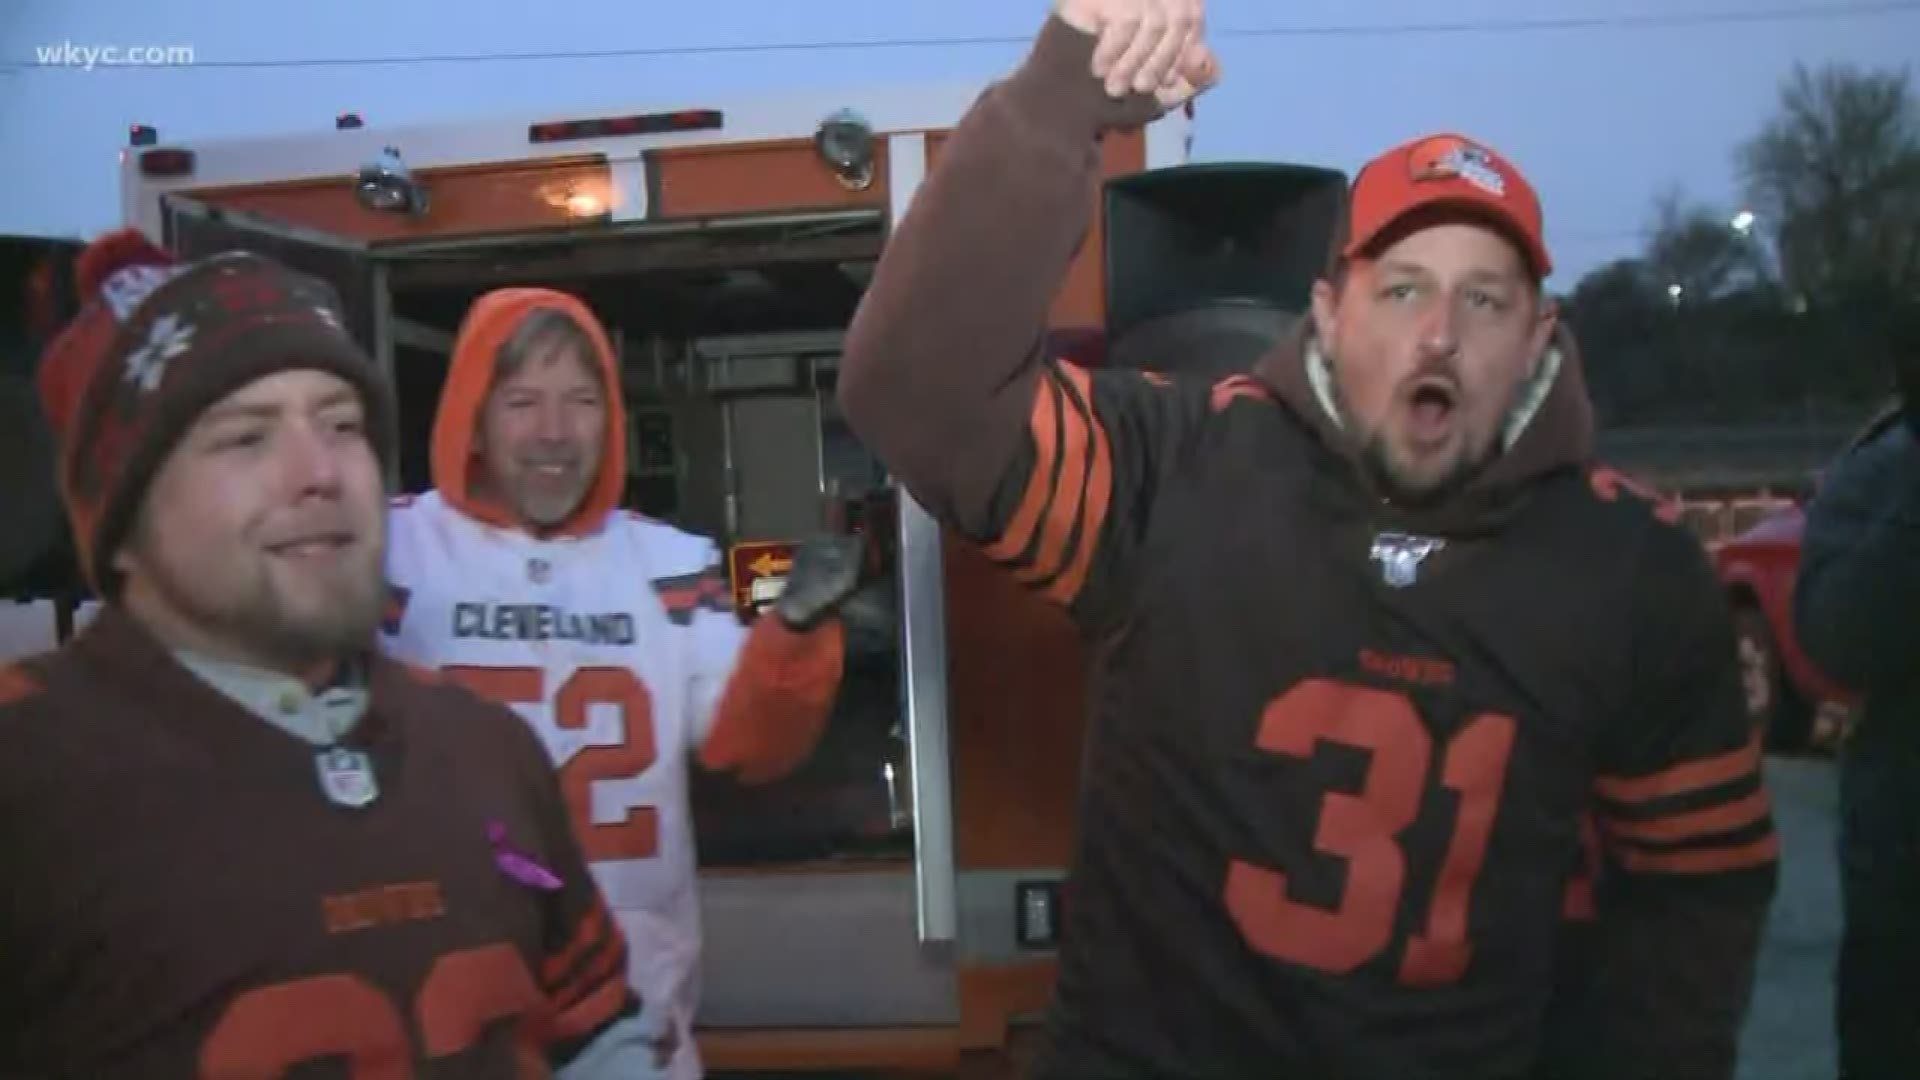 Browns V. Dolphins: Muni Lot Check In